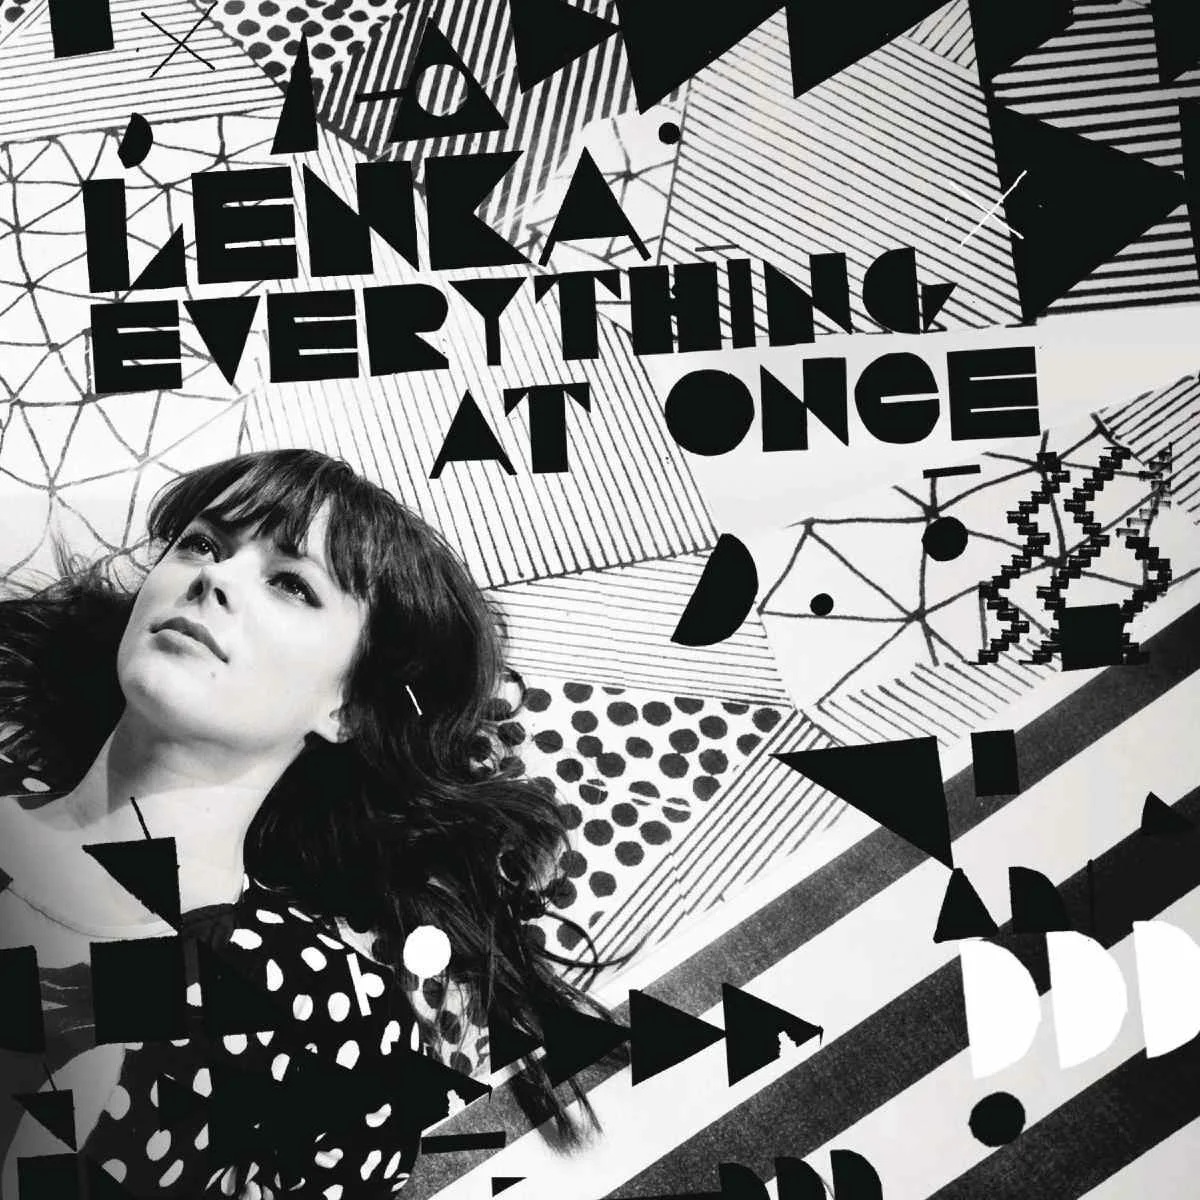 Cover of the single "Everything at Once" by singer Lenka